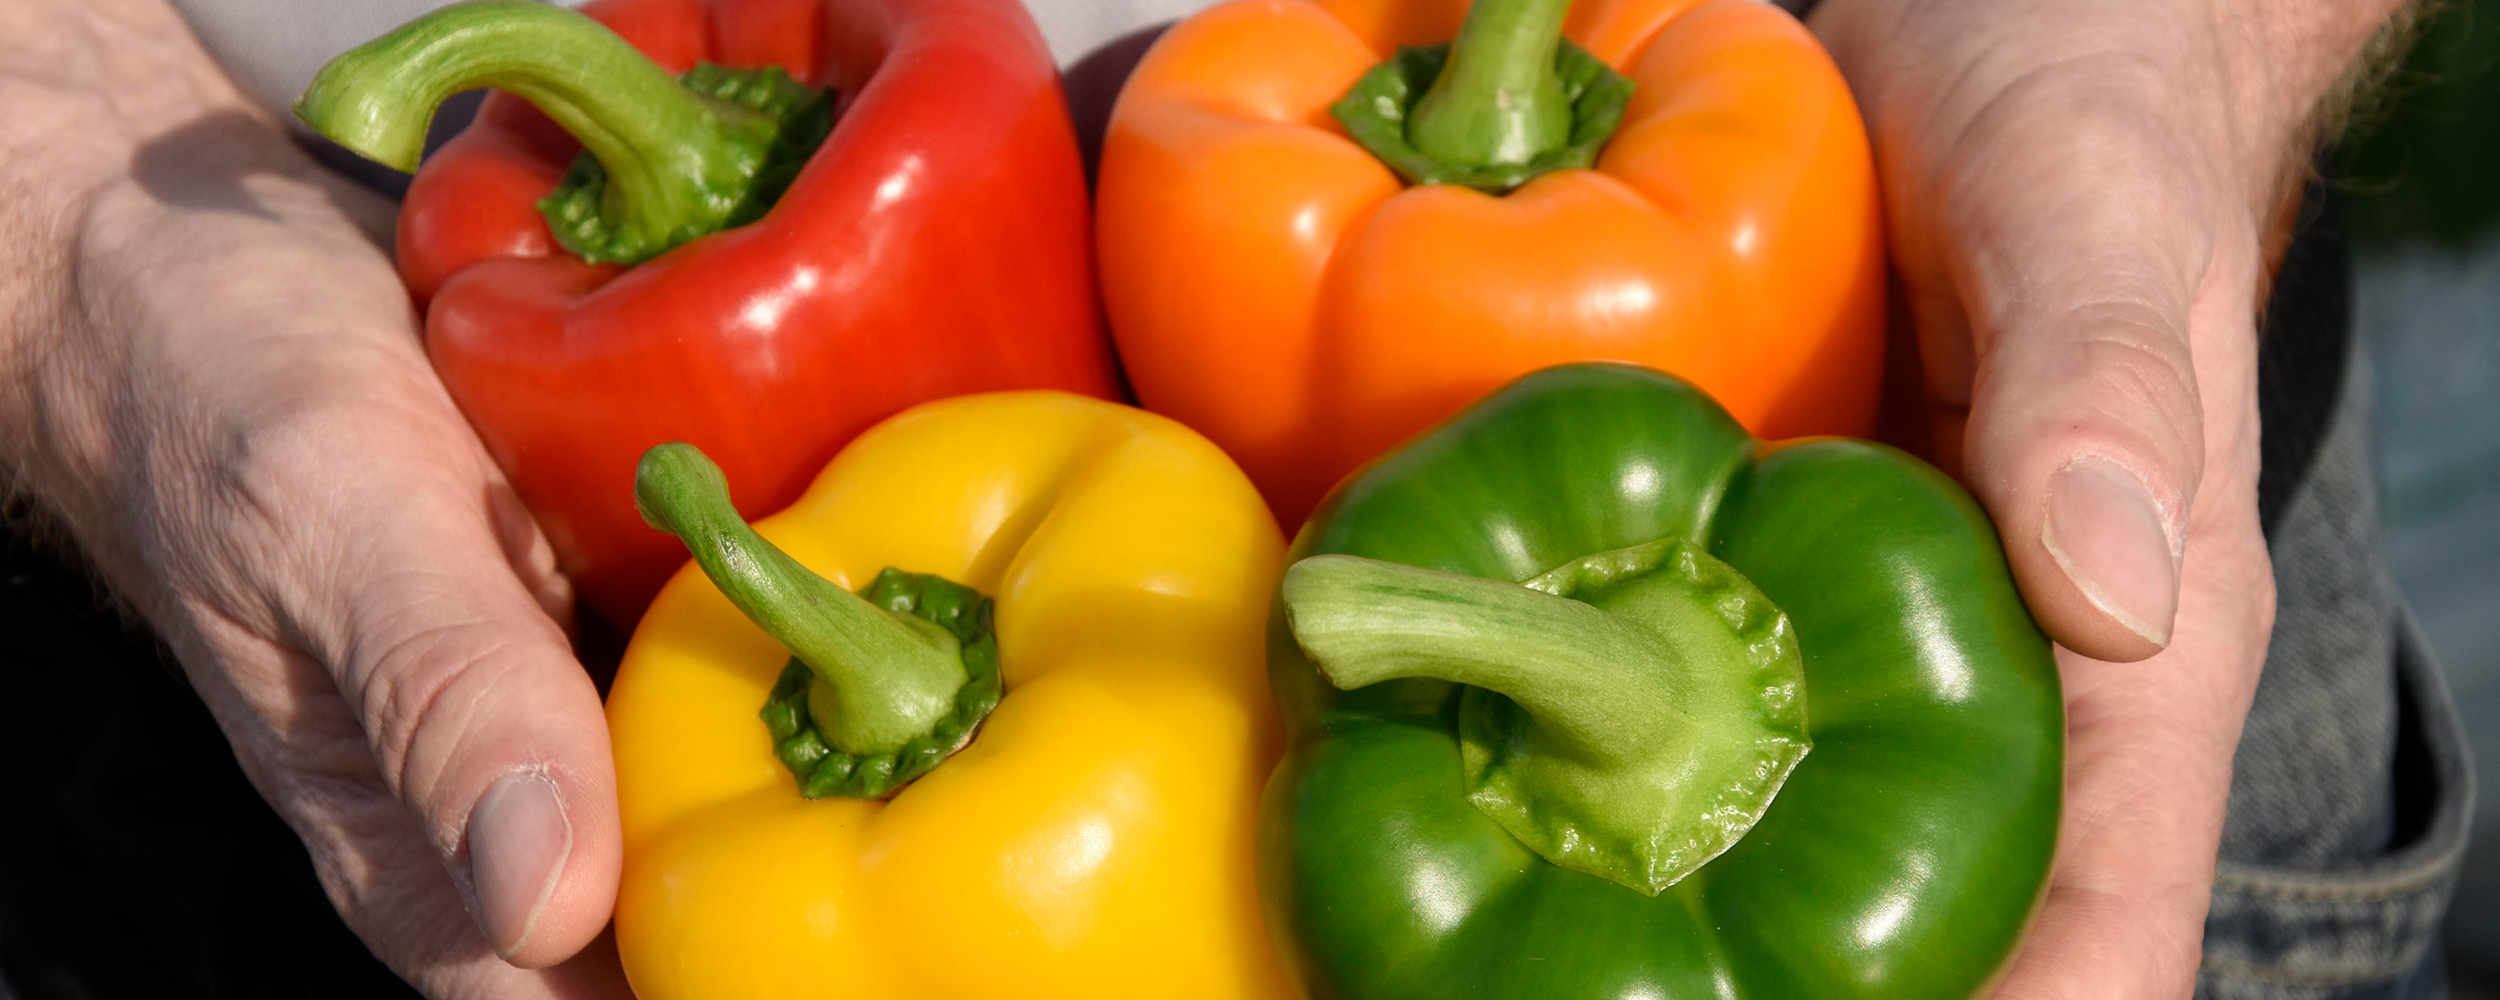 Red, yellow, green and orange peppers being held in two hands.